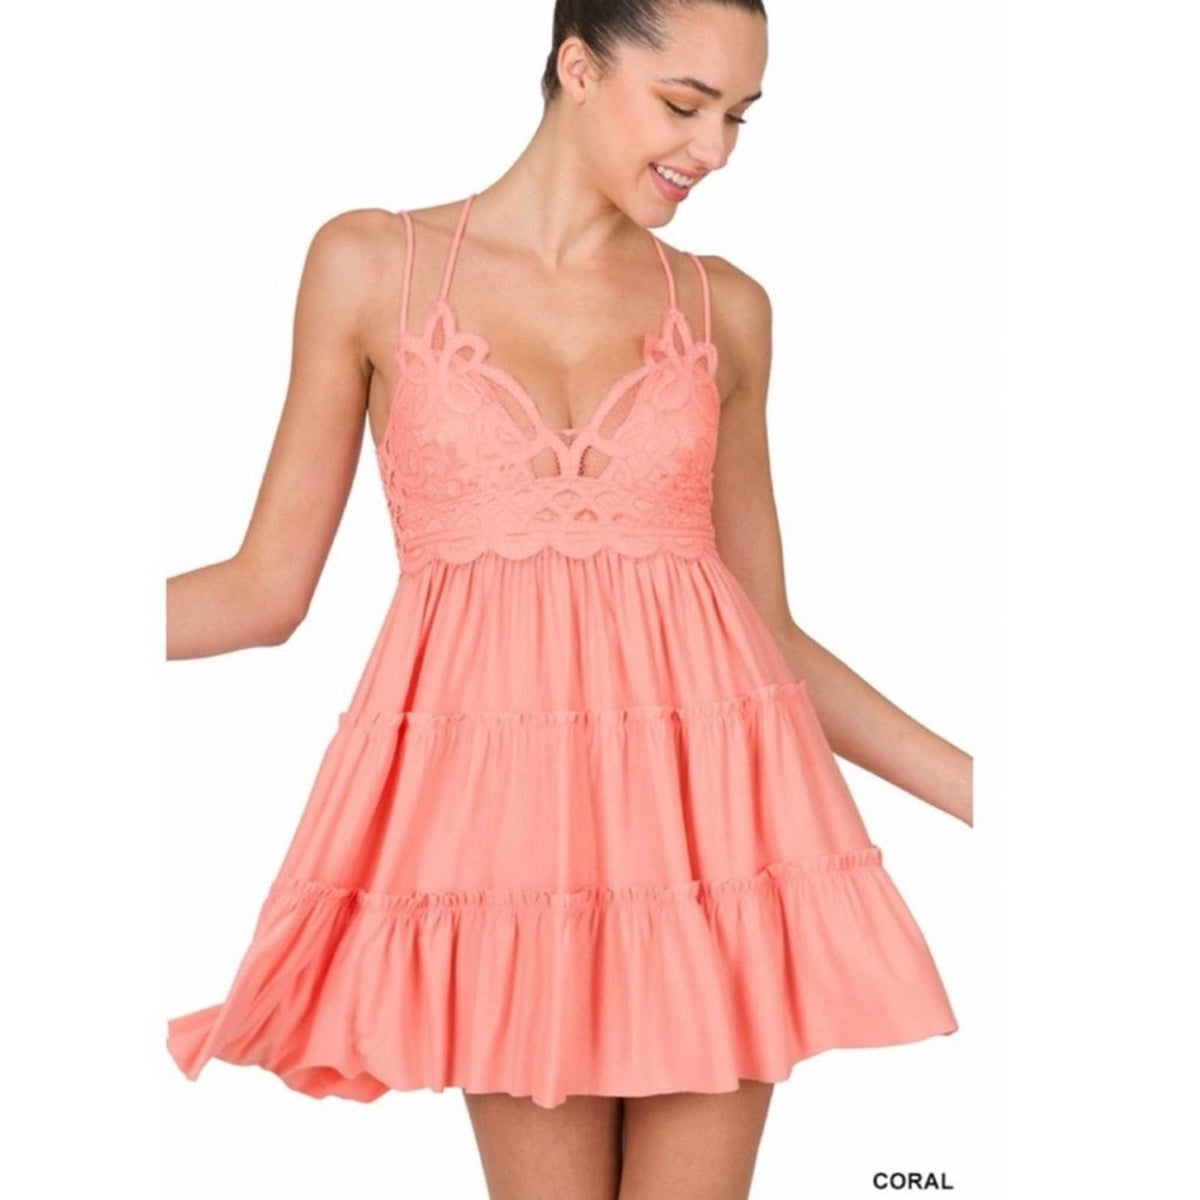 Coral Crochet Cami Top or Dress